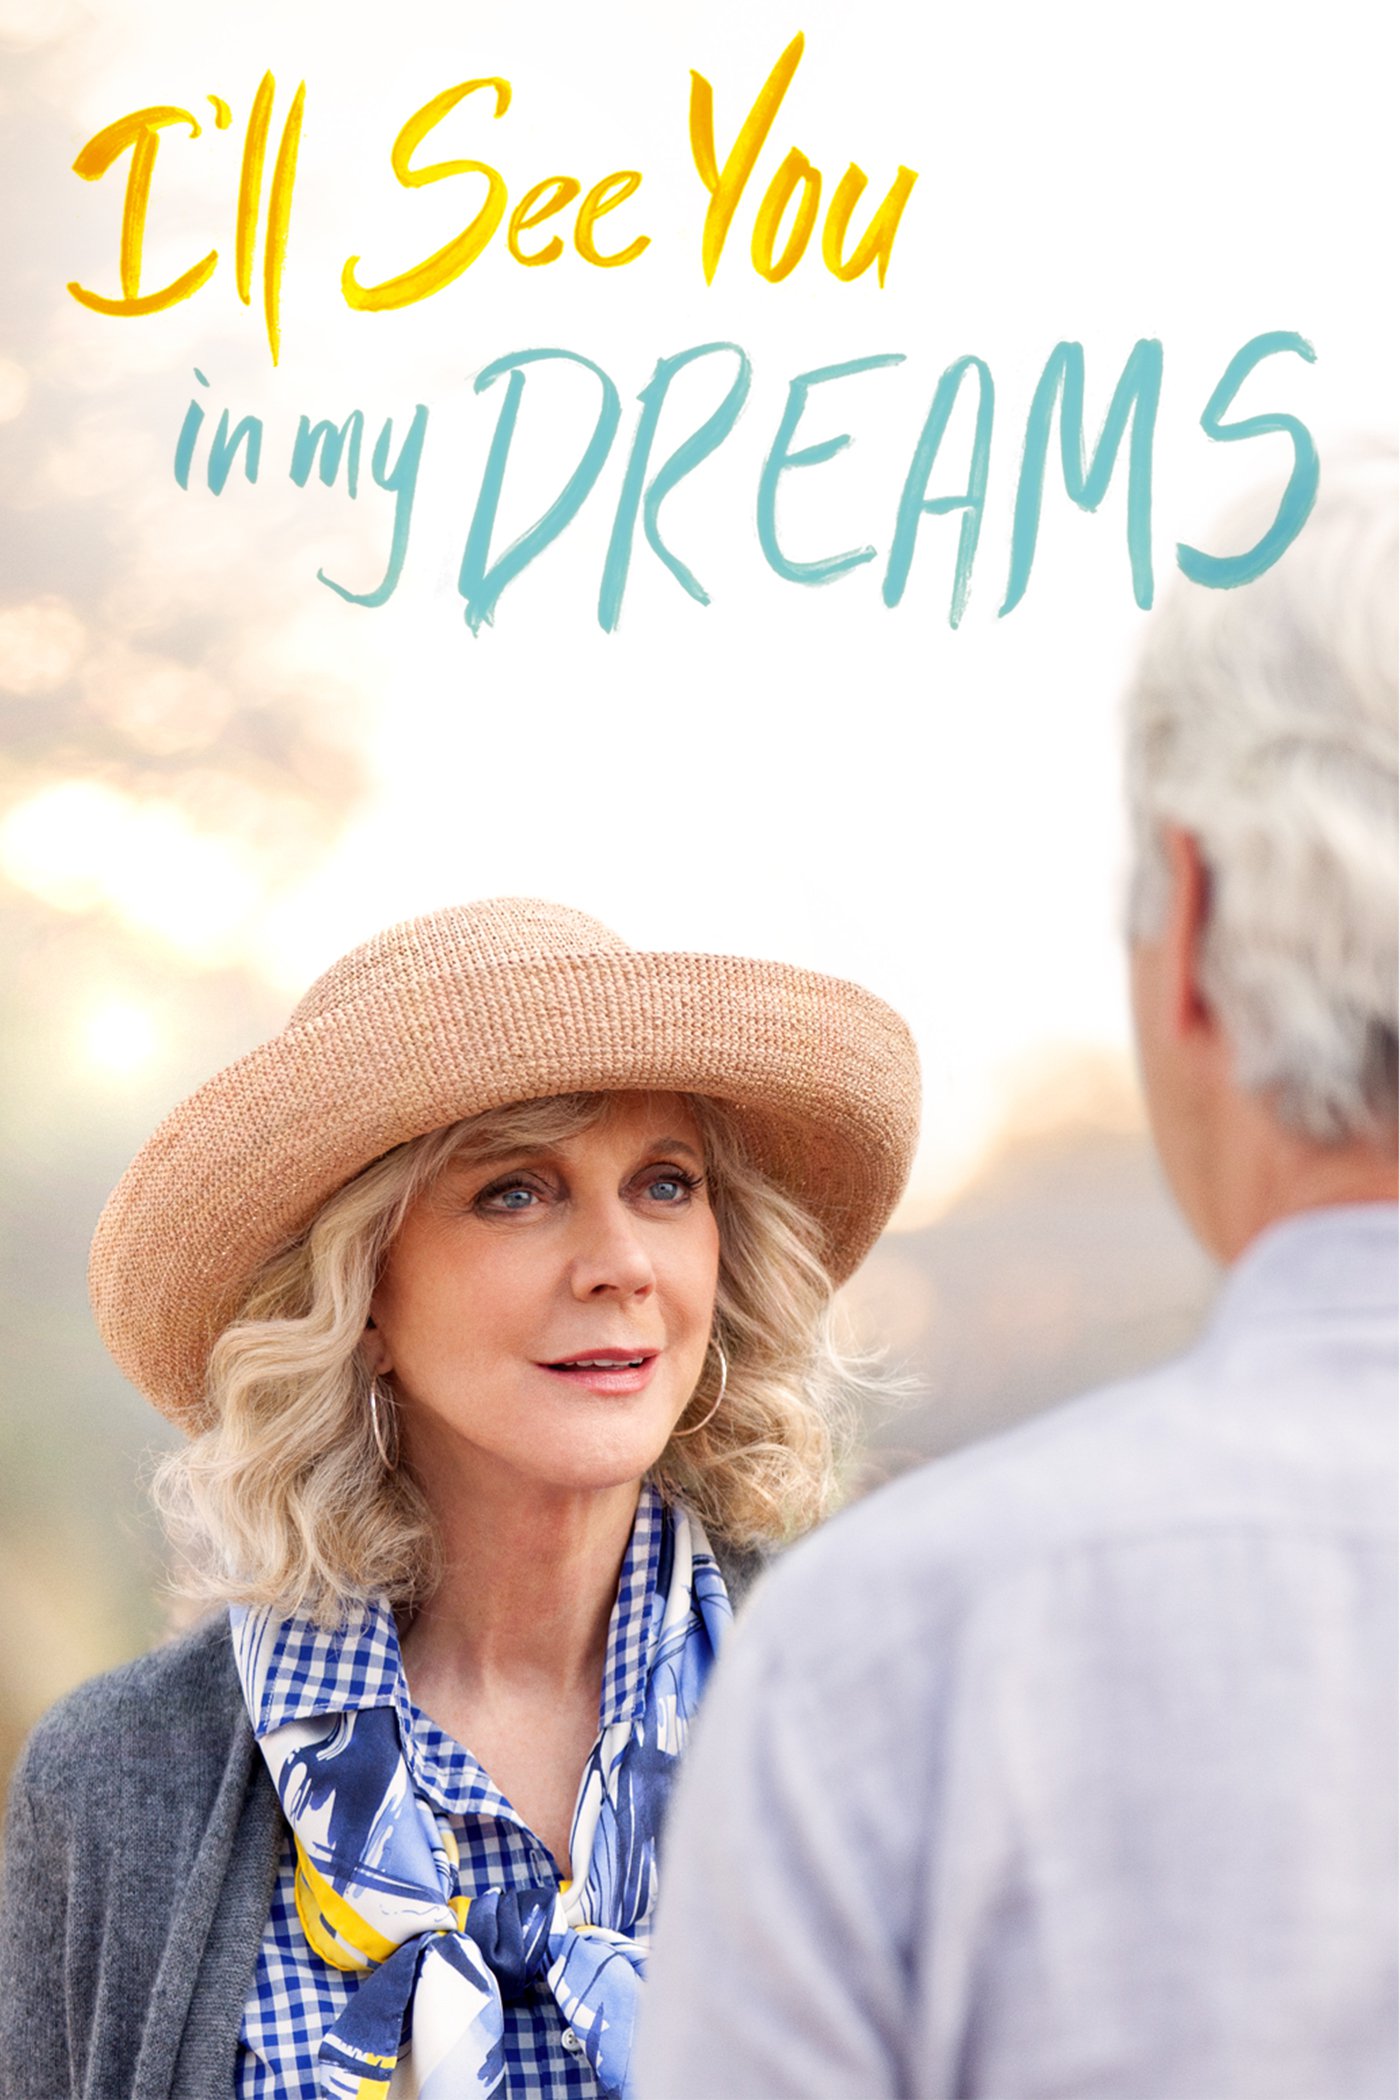 Poster for the movie "I'll See You in My Dreams"